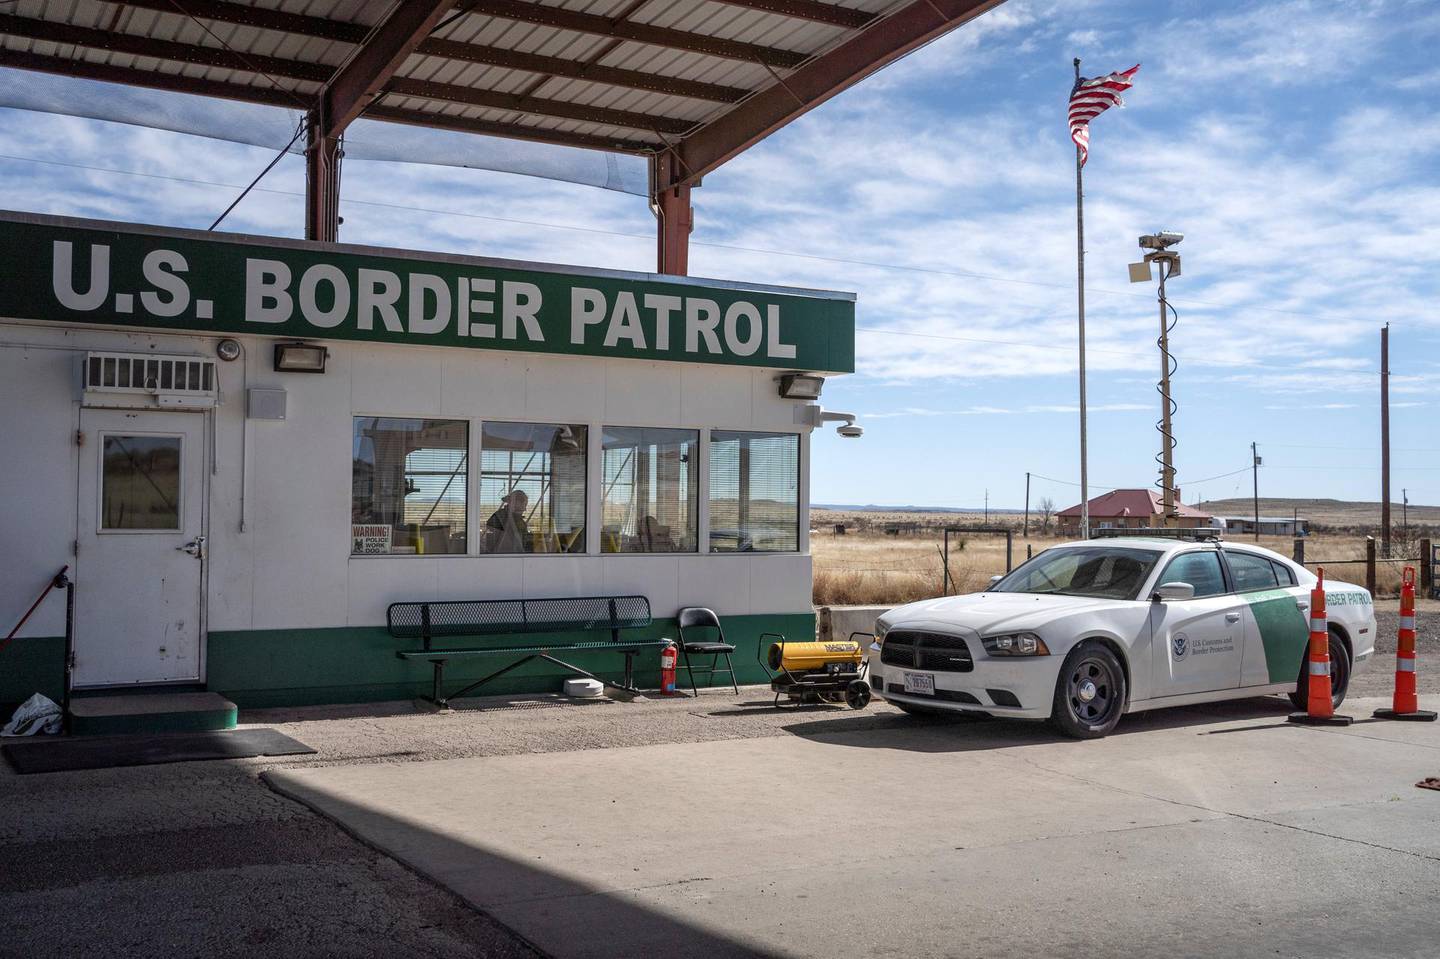 A United States Border Patrol checkpoint  is pictured near Marfa, Texas on January 29, 2020. - Agents in the Big Bend Border Patrol Sector employ tracking techniques and spend a lot of time on foot and on horseback to pursue smugglers, and drug or human traffickers through the remote terrain of West Texas. (Photo by Paul Ratje / AFP)